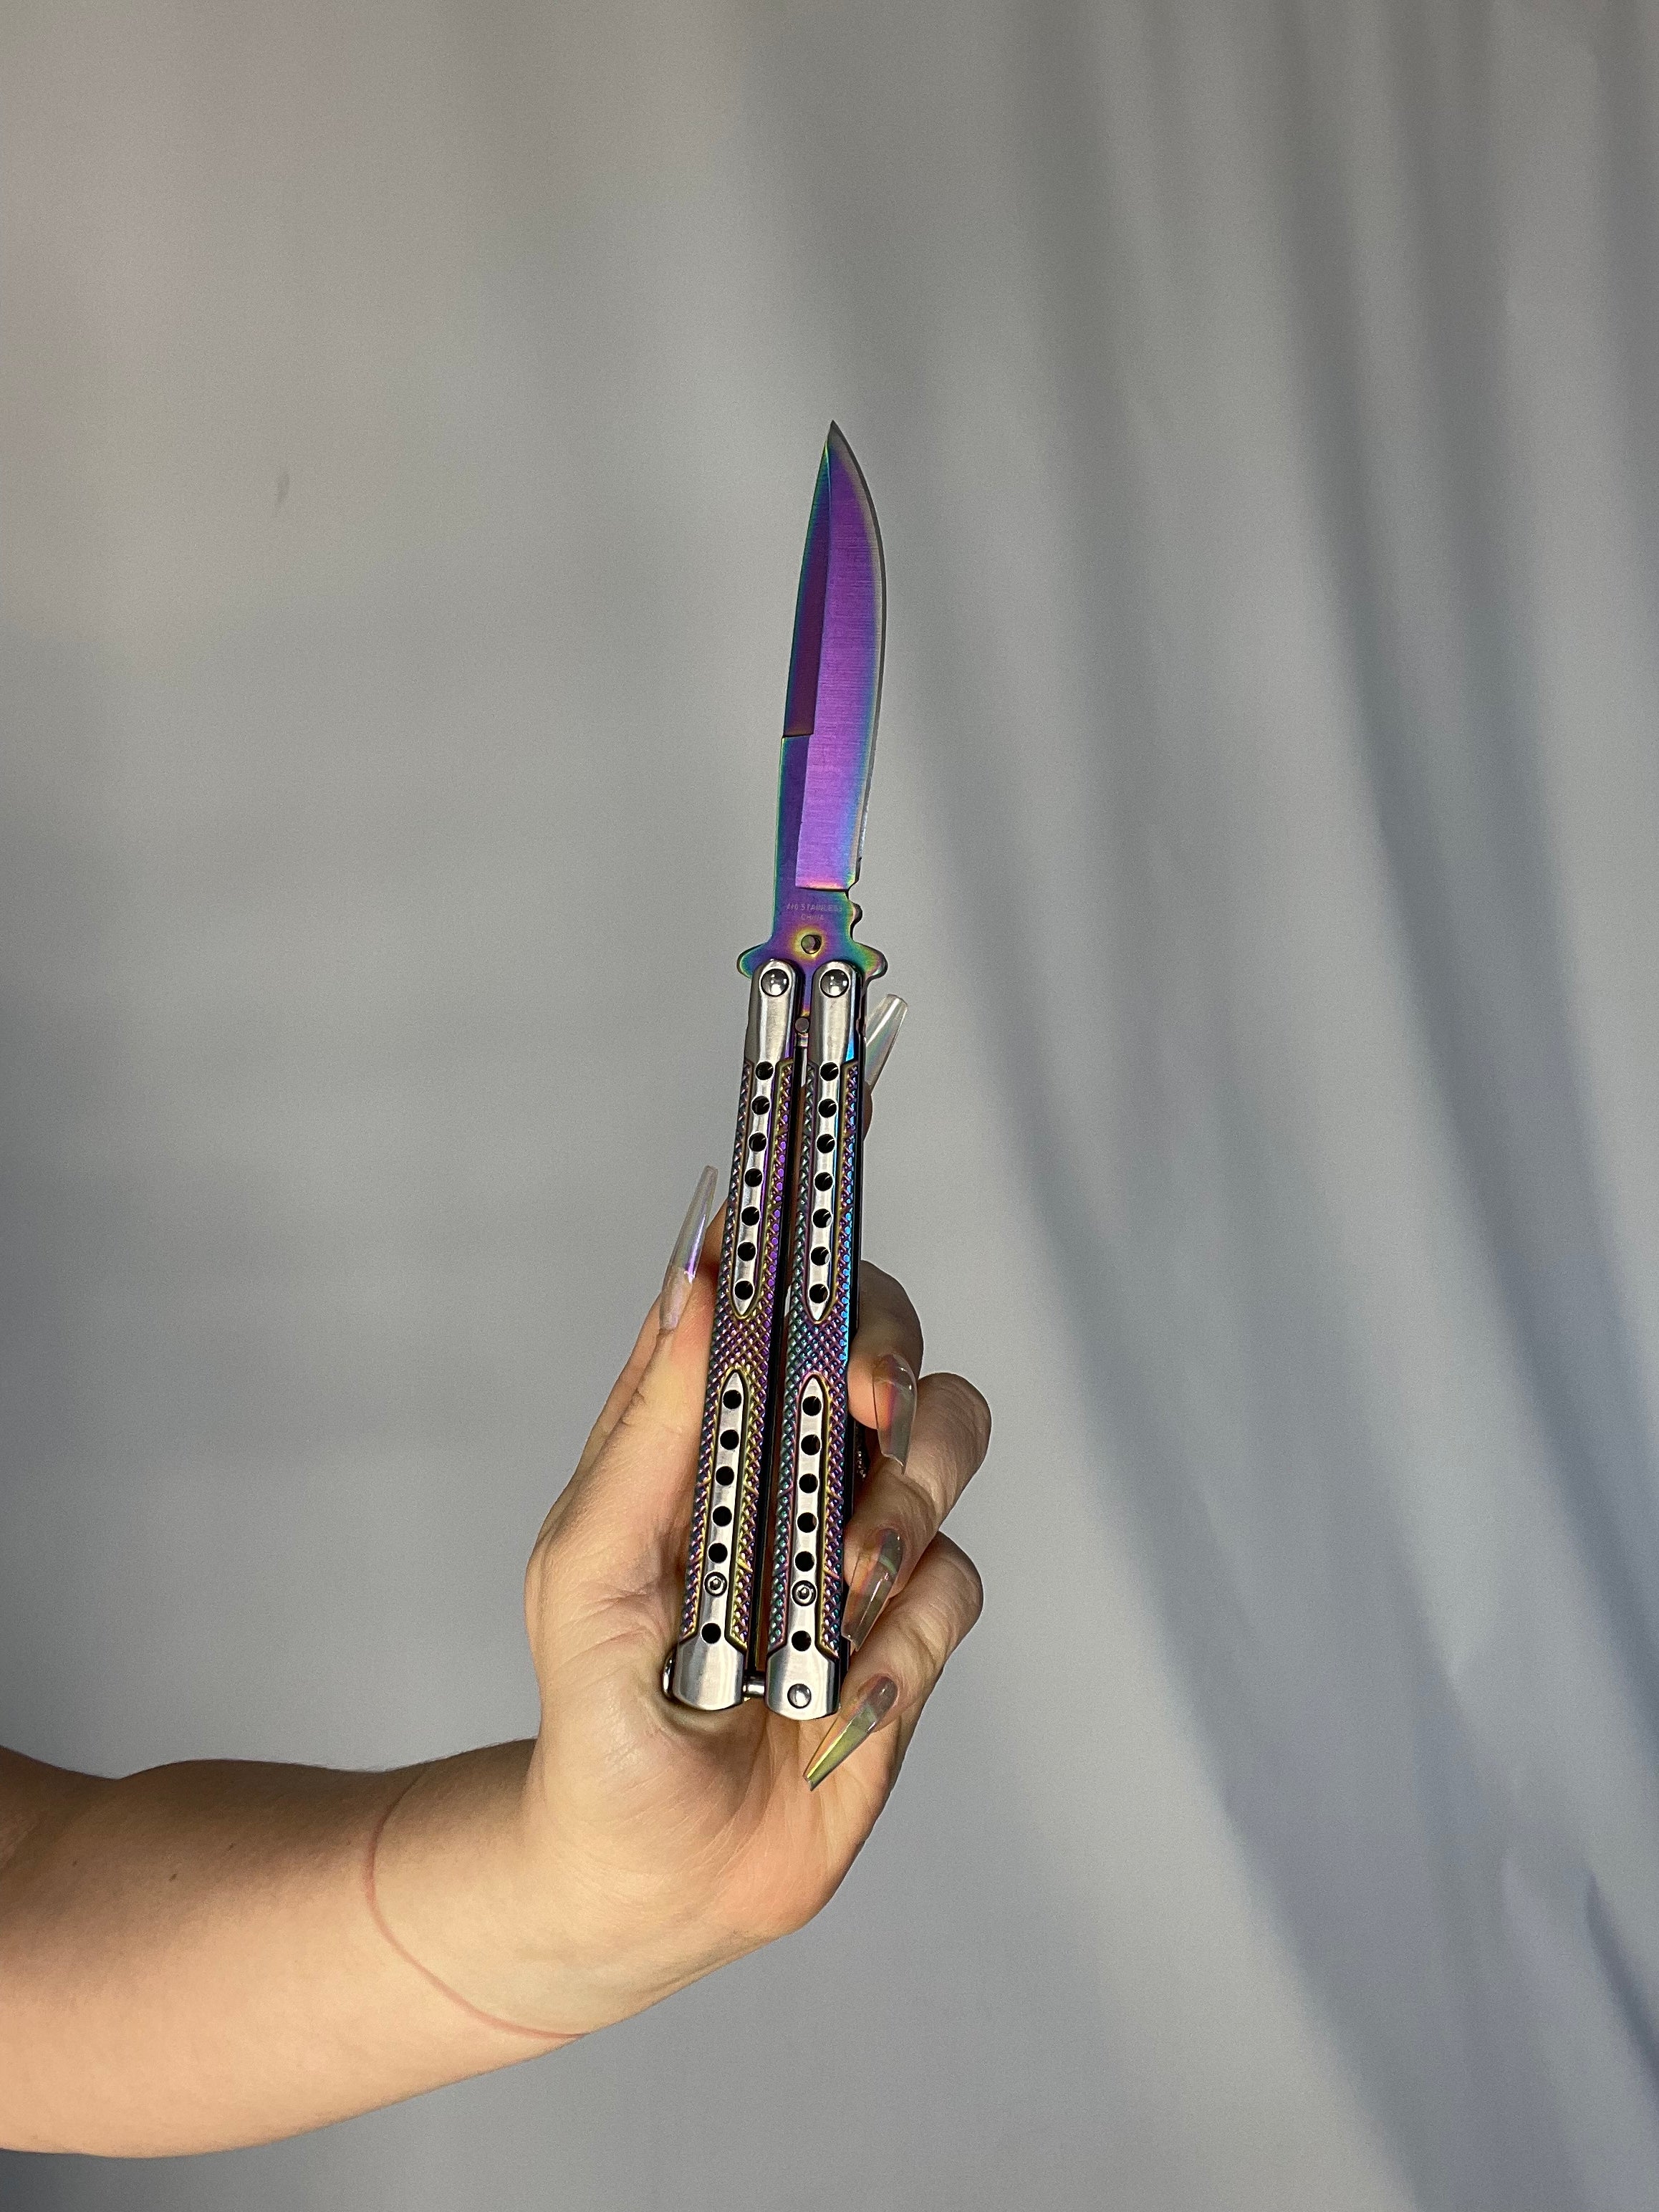 Polychromatic Butterfly Knife - Blades For Babes - Butterfly Blade - 5